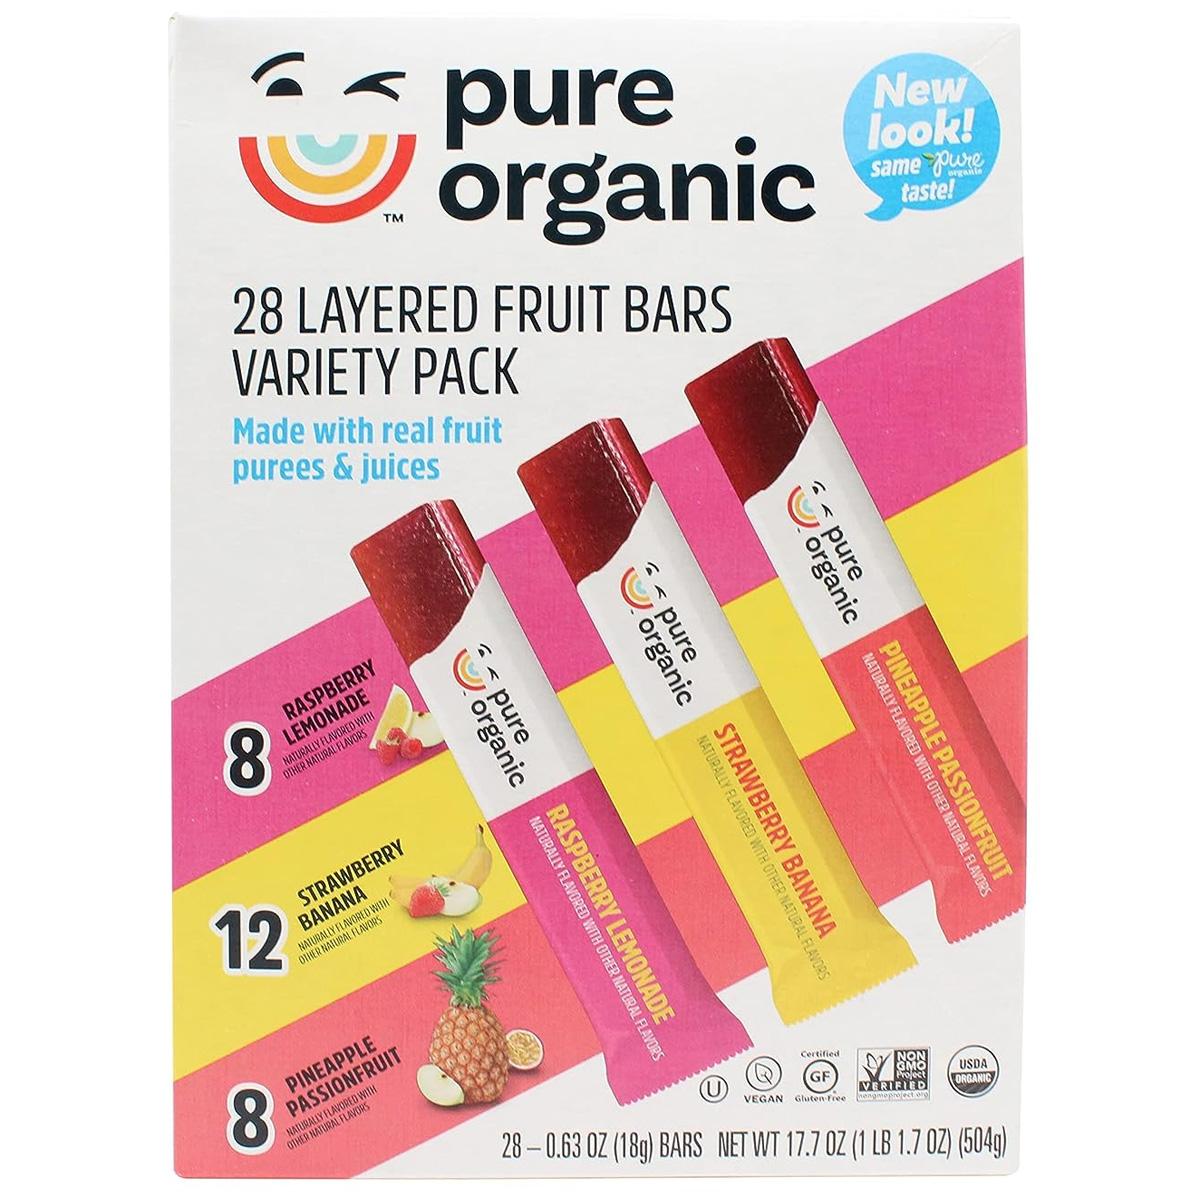 Pure Organic Layered Fruit Bars Variety 28 Pack for $11.99